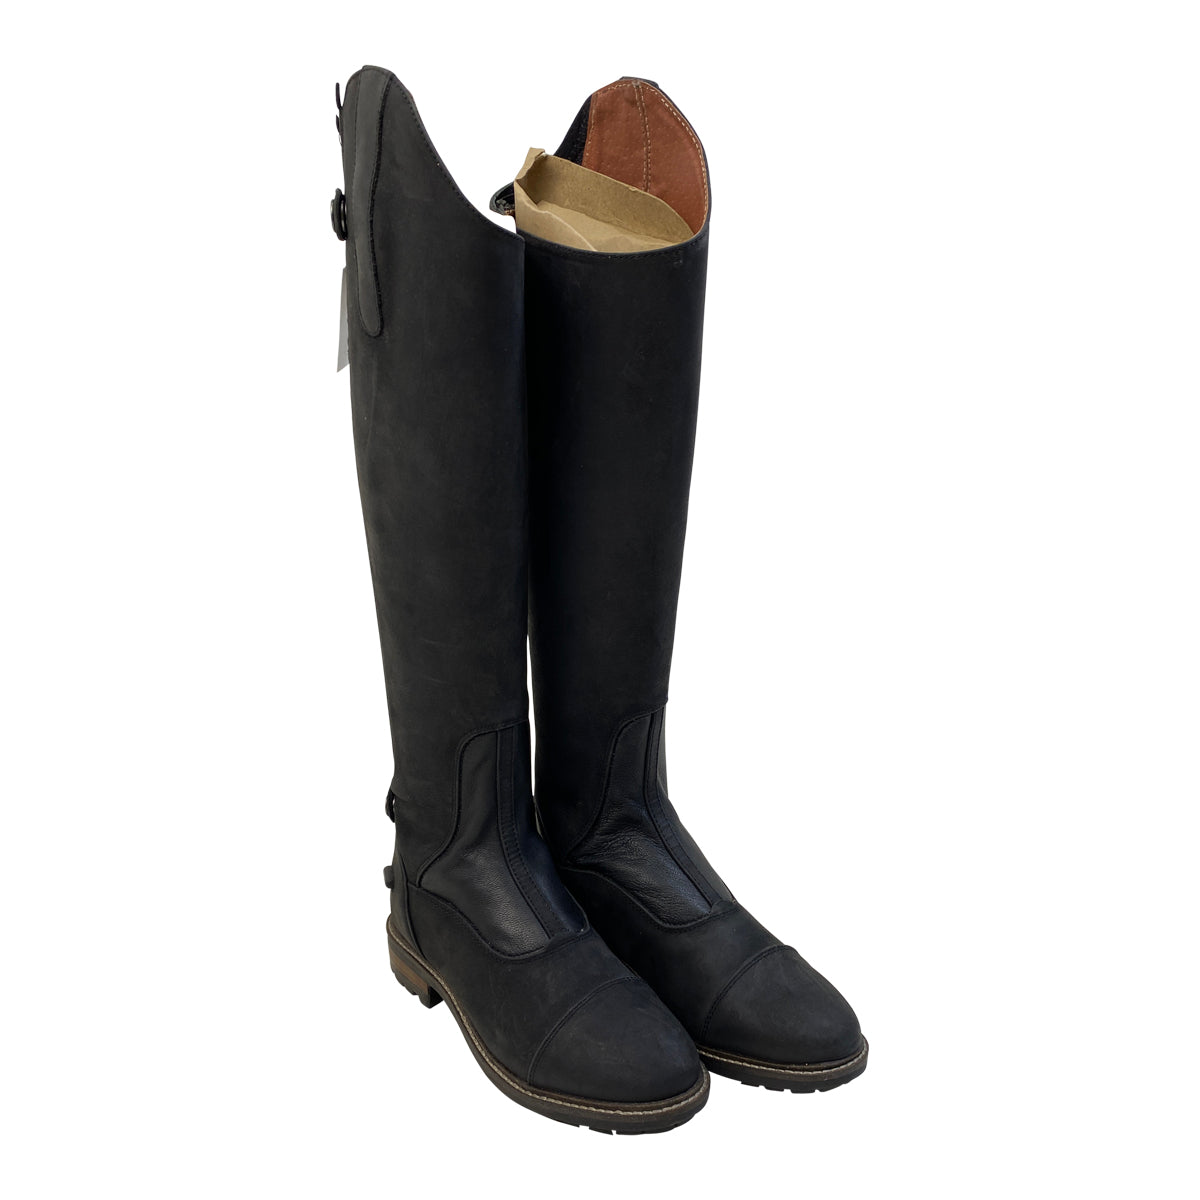 Ovation 'Coventry' Boots in Black